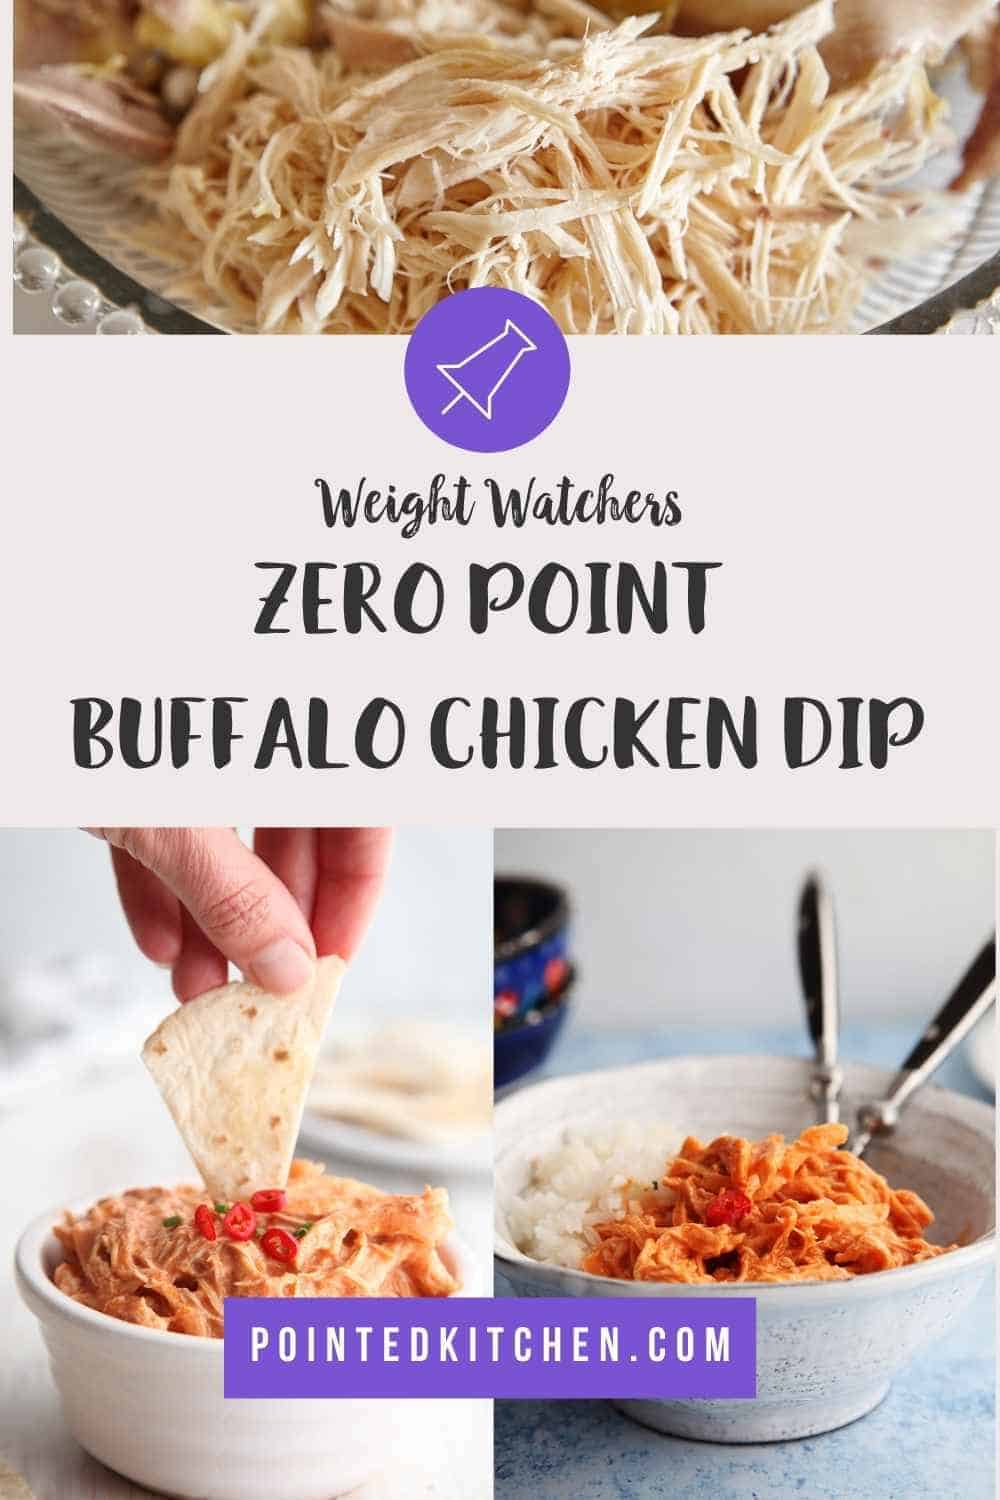 3 pictures of shredded chicken made into a 'dip' with a text overlay stating it is zero points on WW.